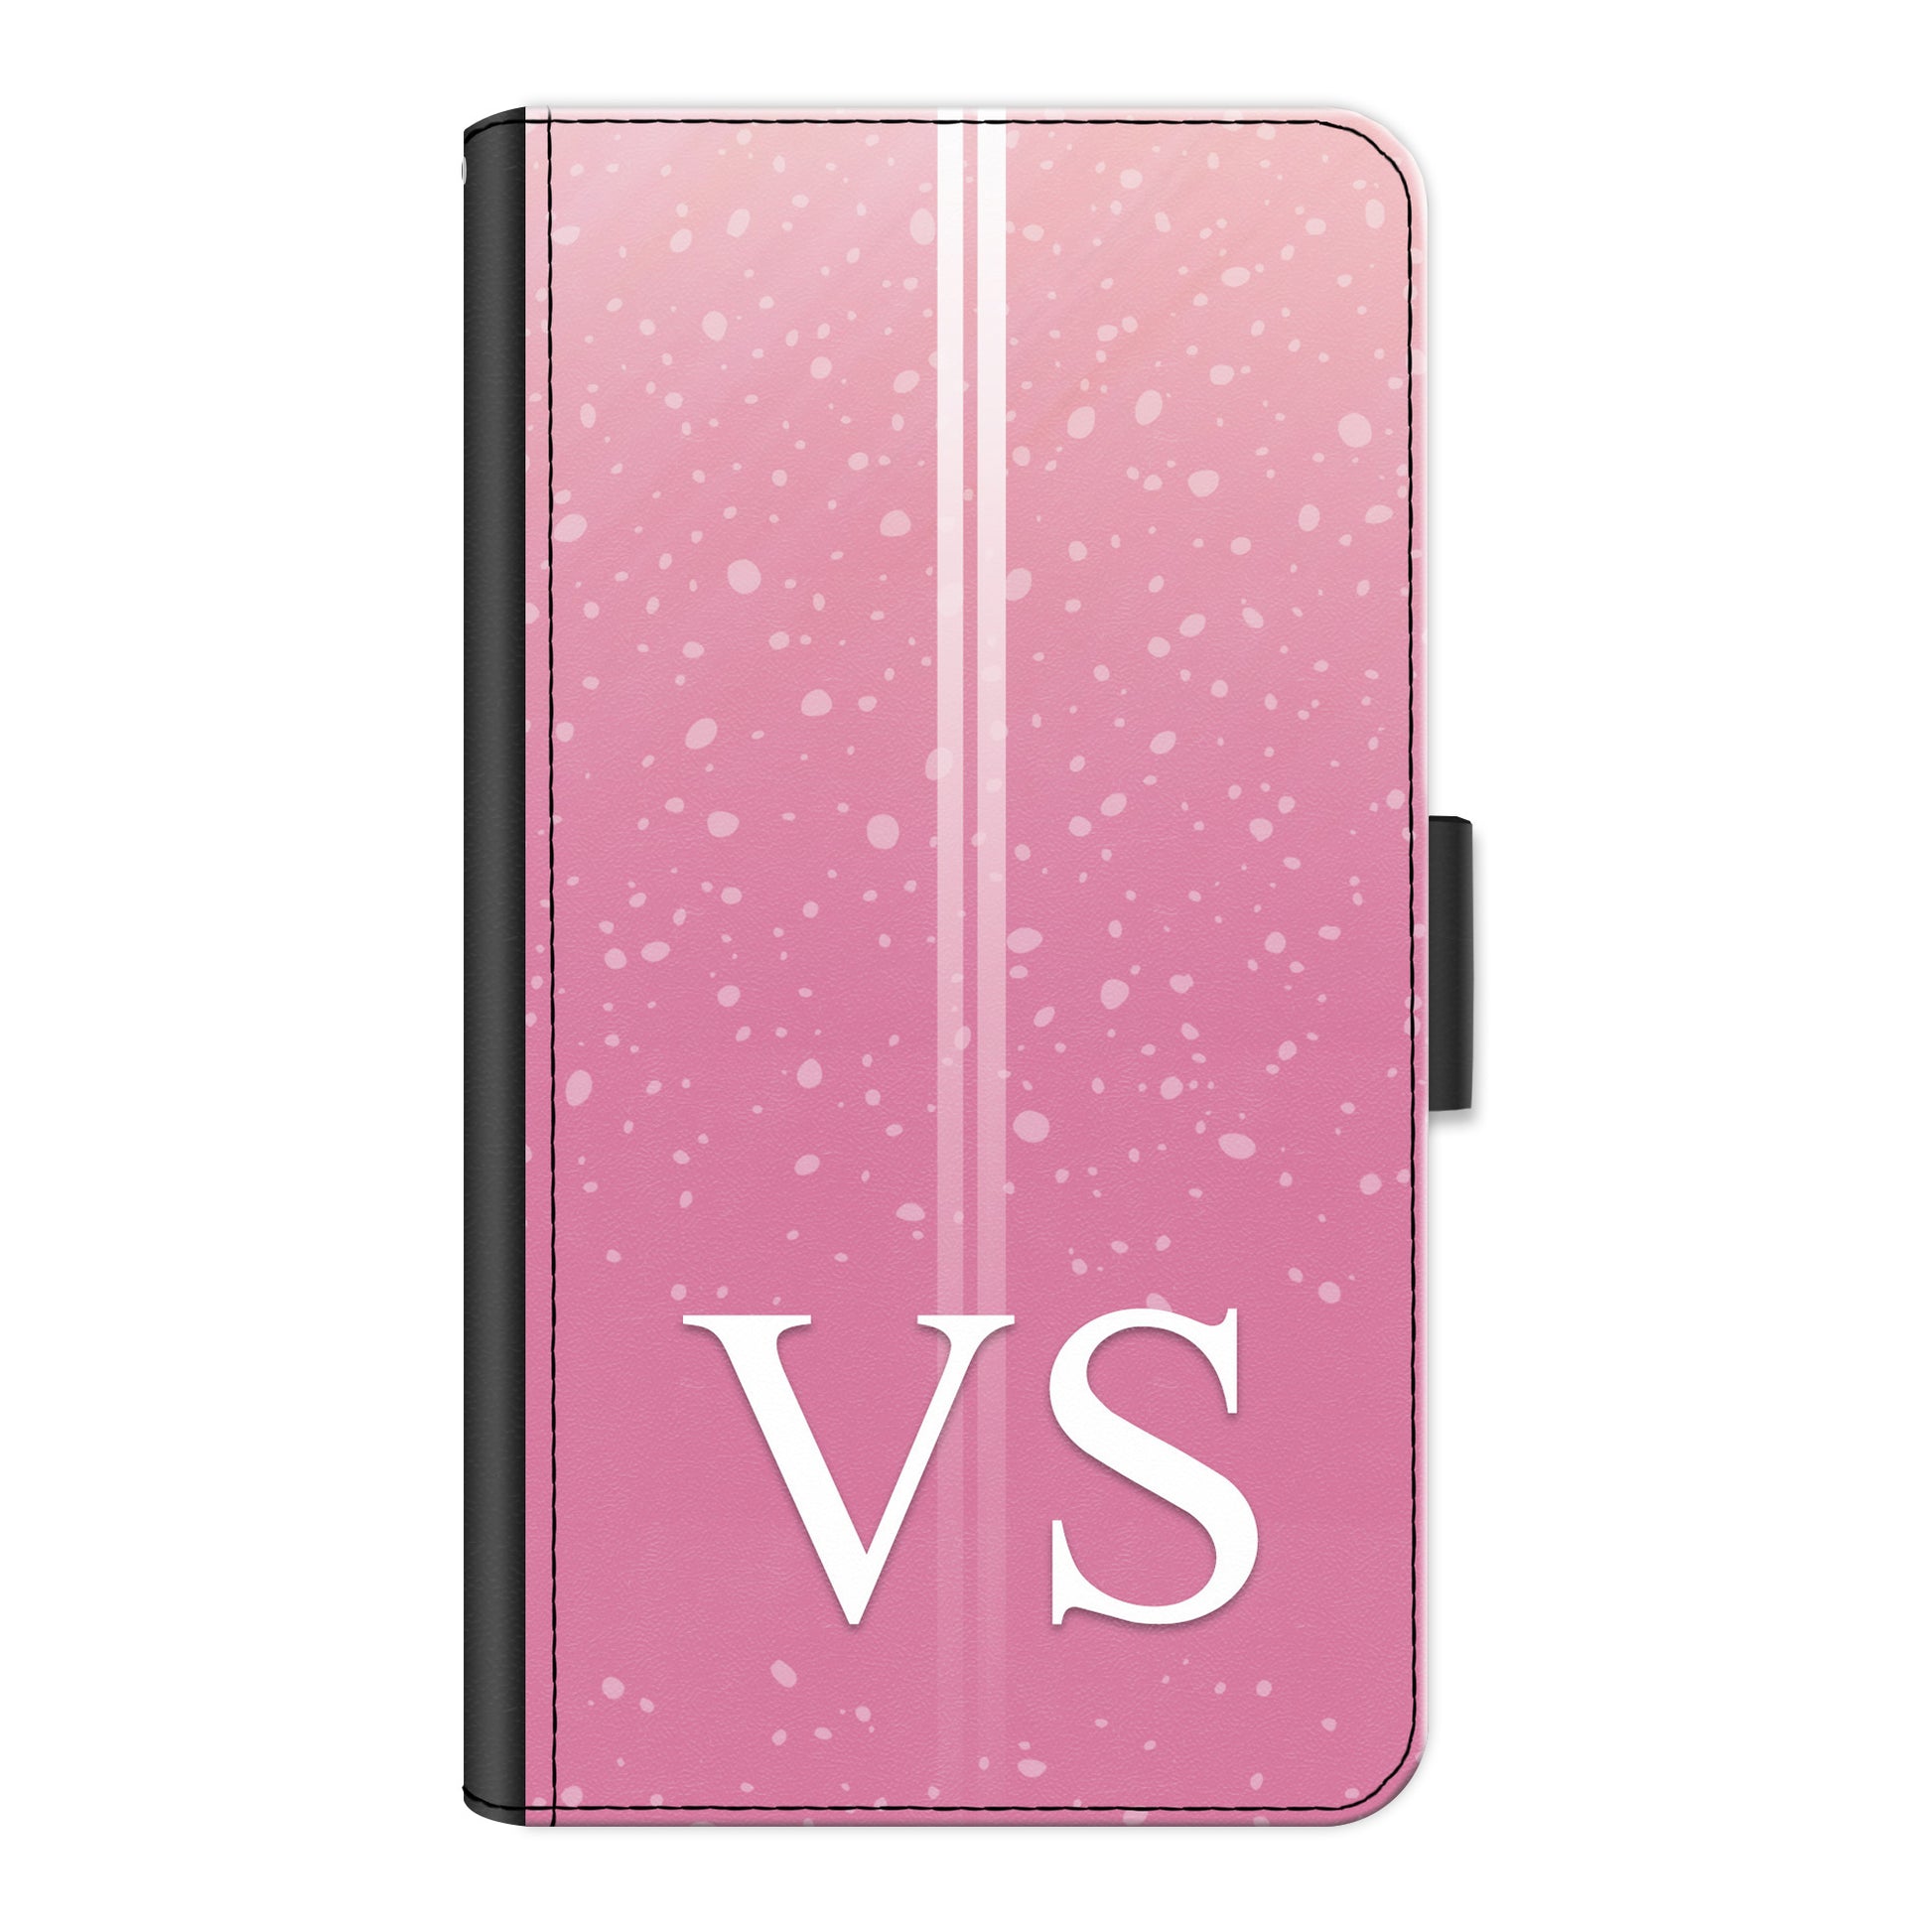 Personalised Xiaomi Phone Leather Wallet with White Initials, Pin Stripes and Droplets on Pink